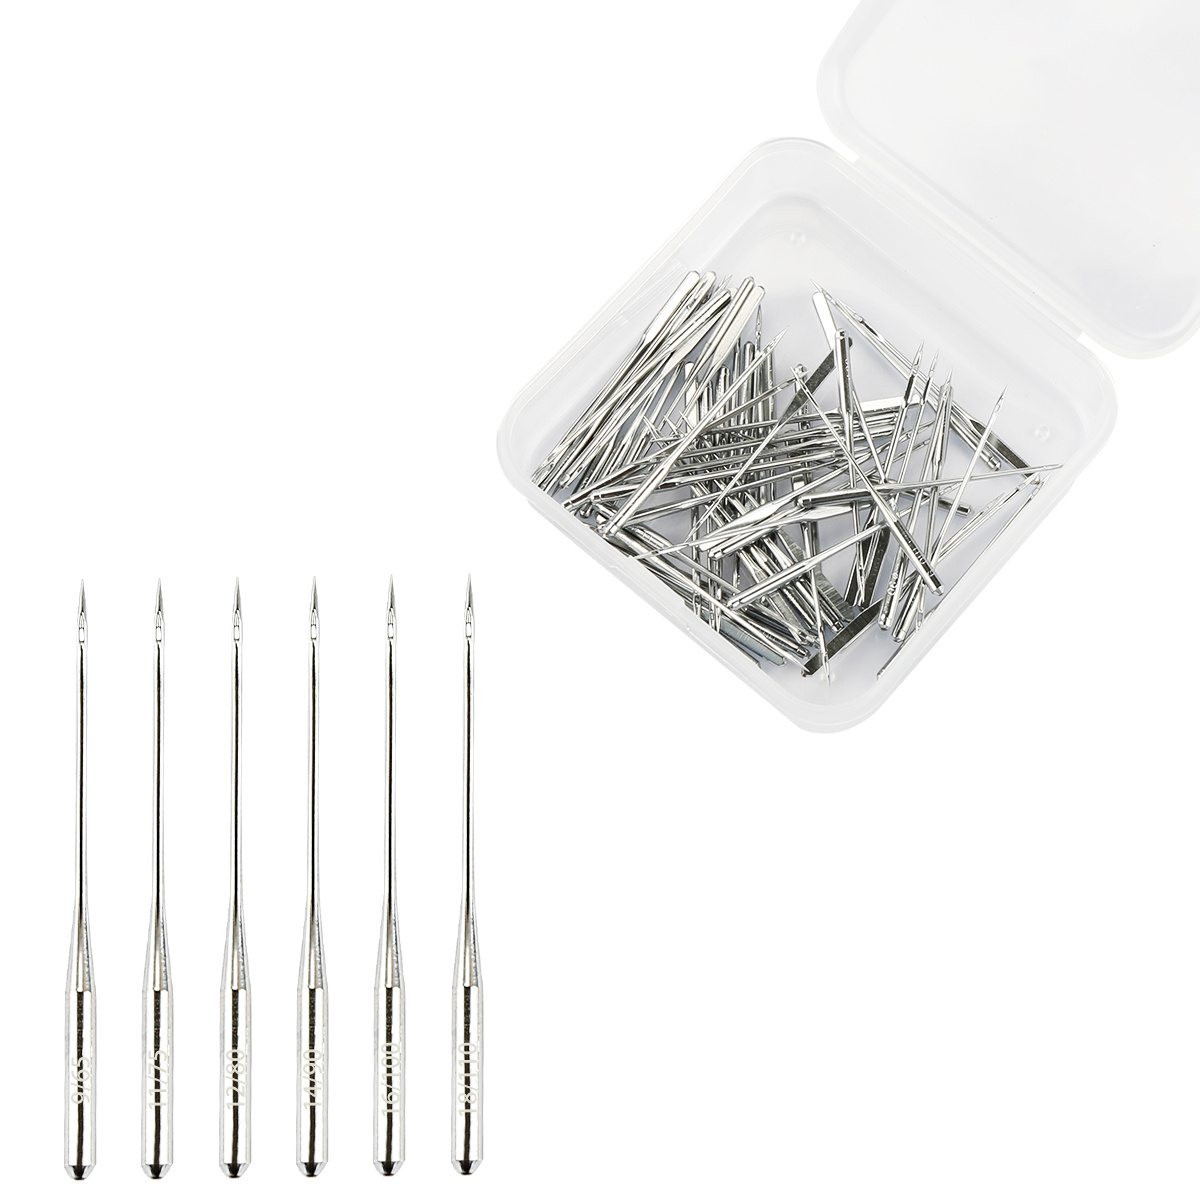 Sewing Machine Needles Universal Sewing Machine Needle for Singer Brother  Janome